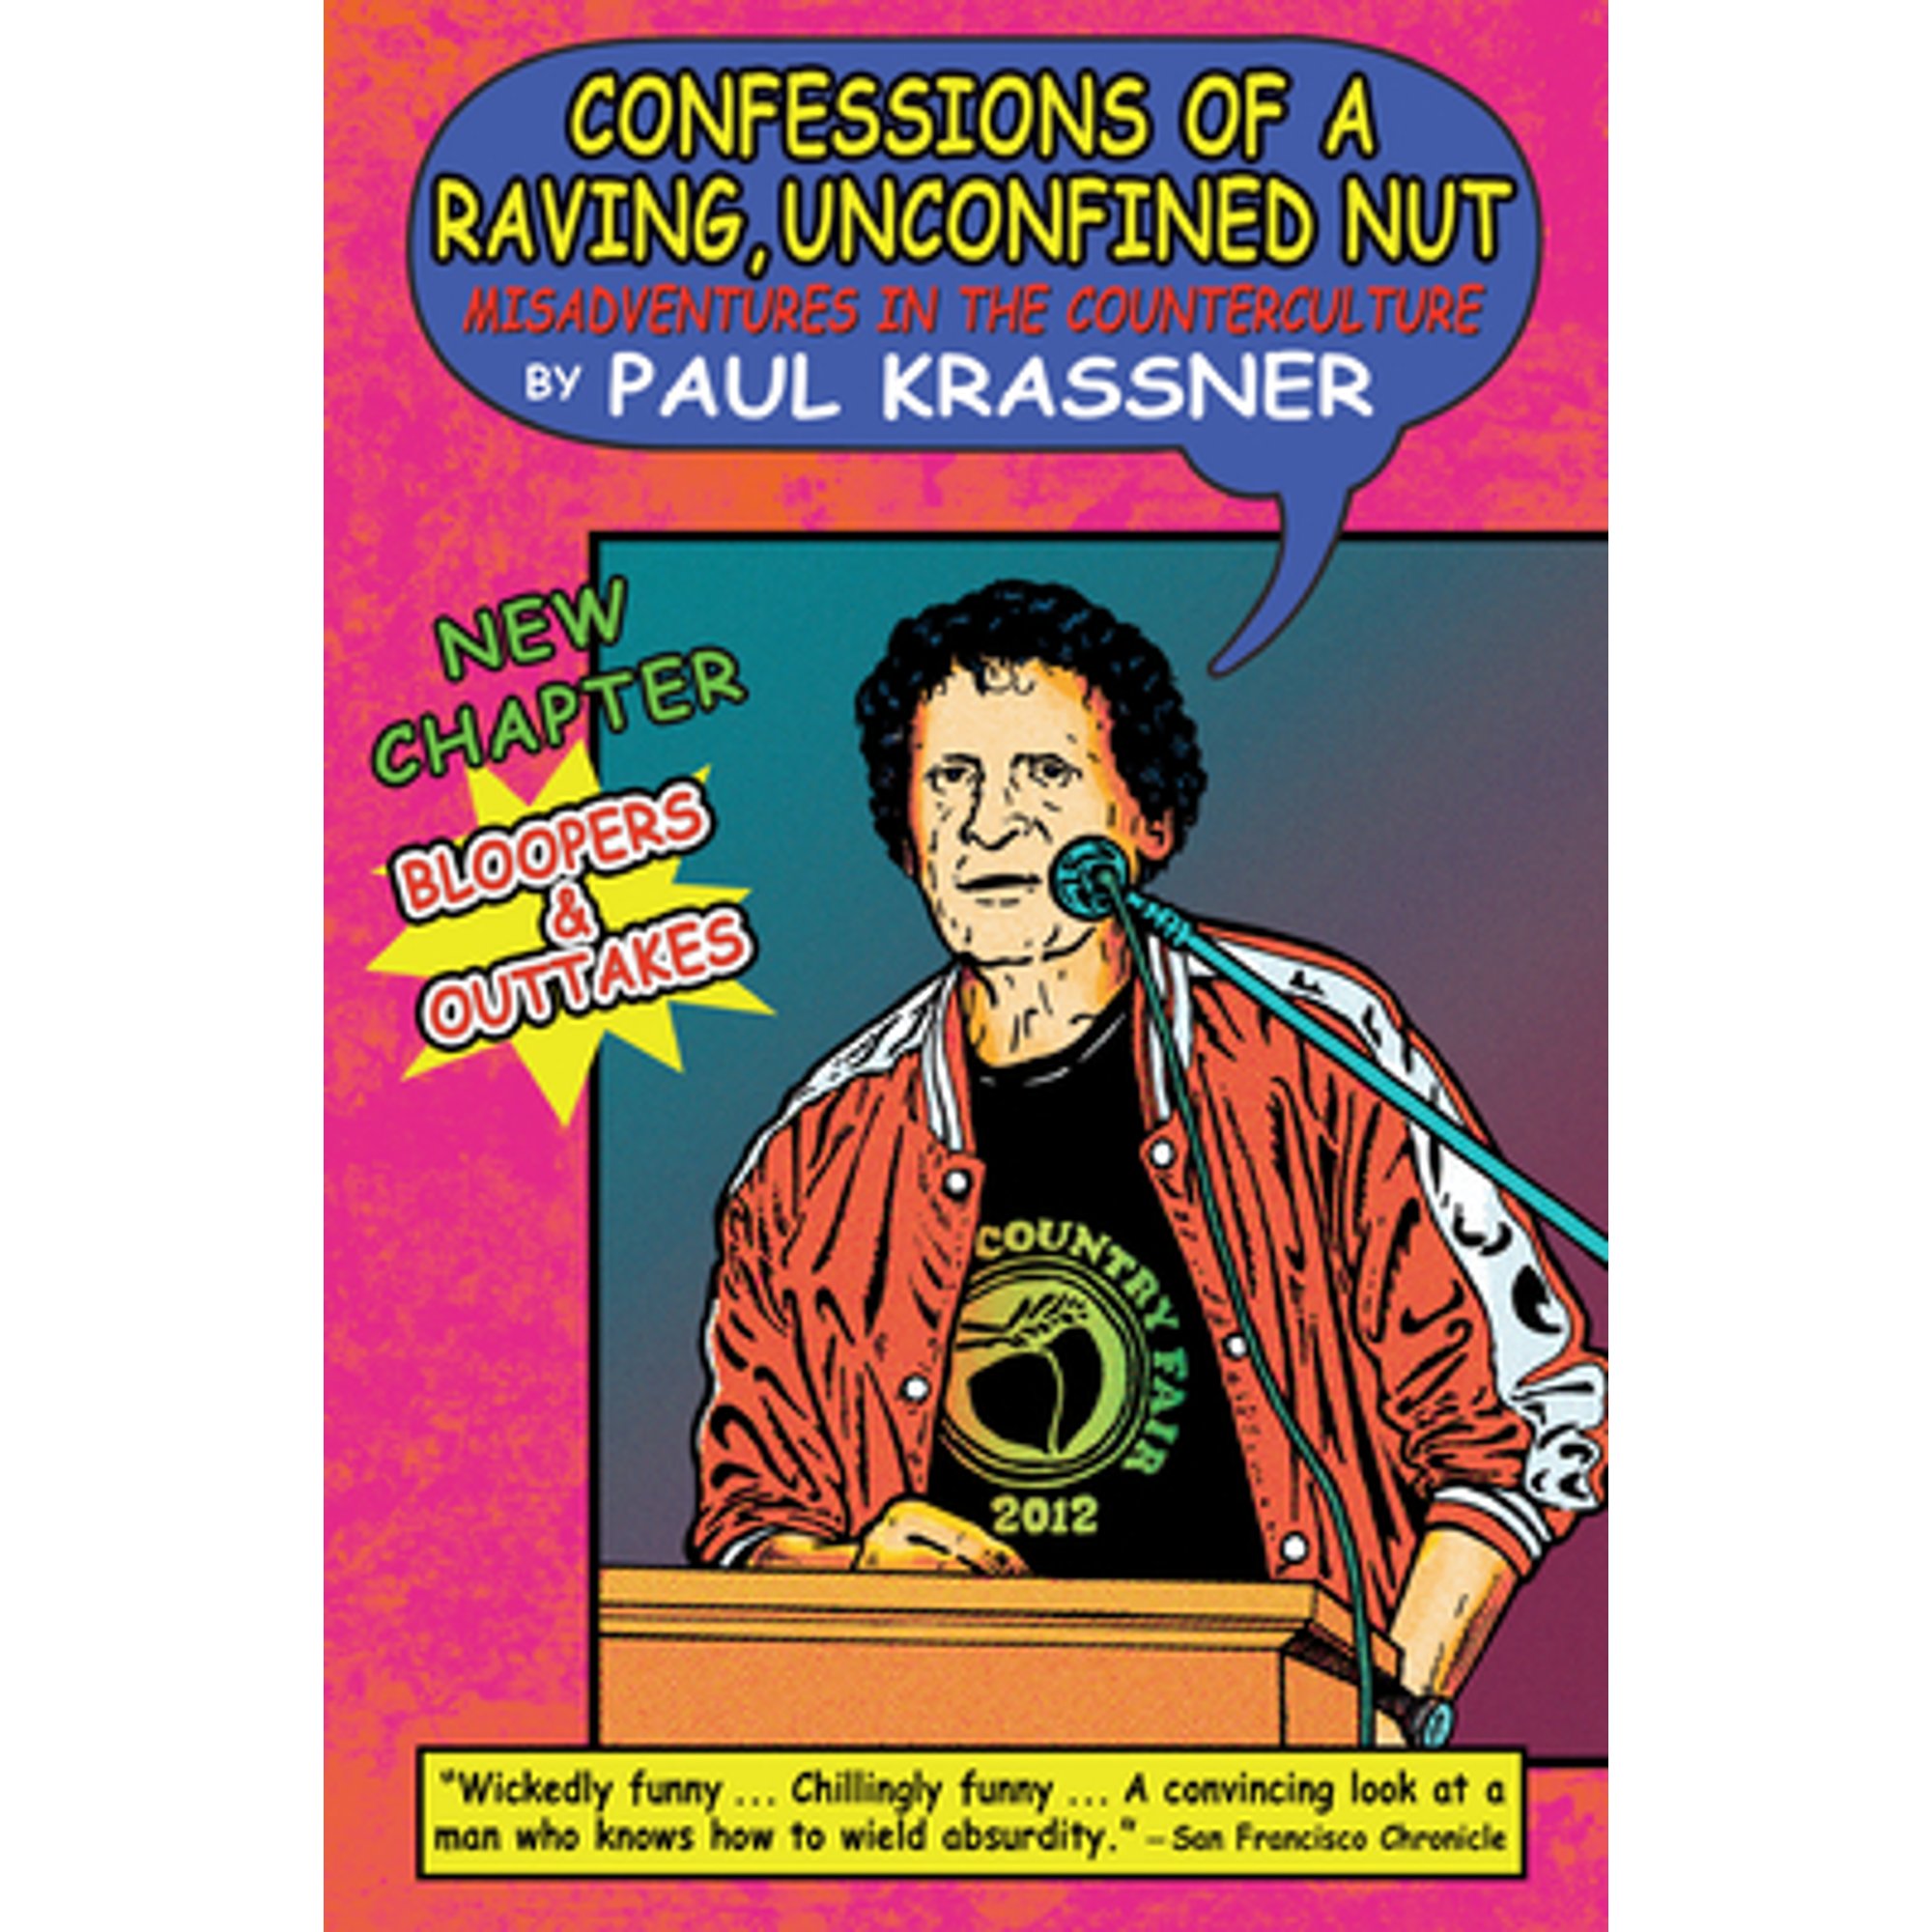 Confessions of a raving unconfined nut misadventures in the counterculture pre